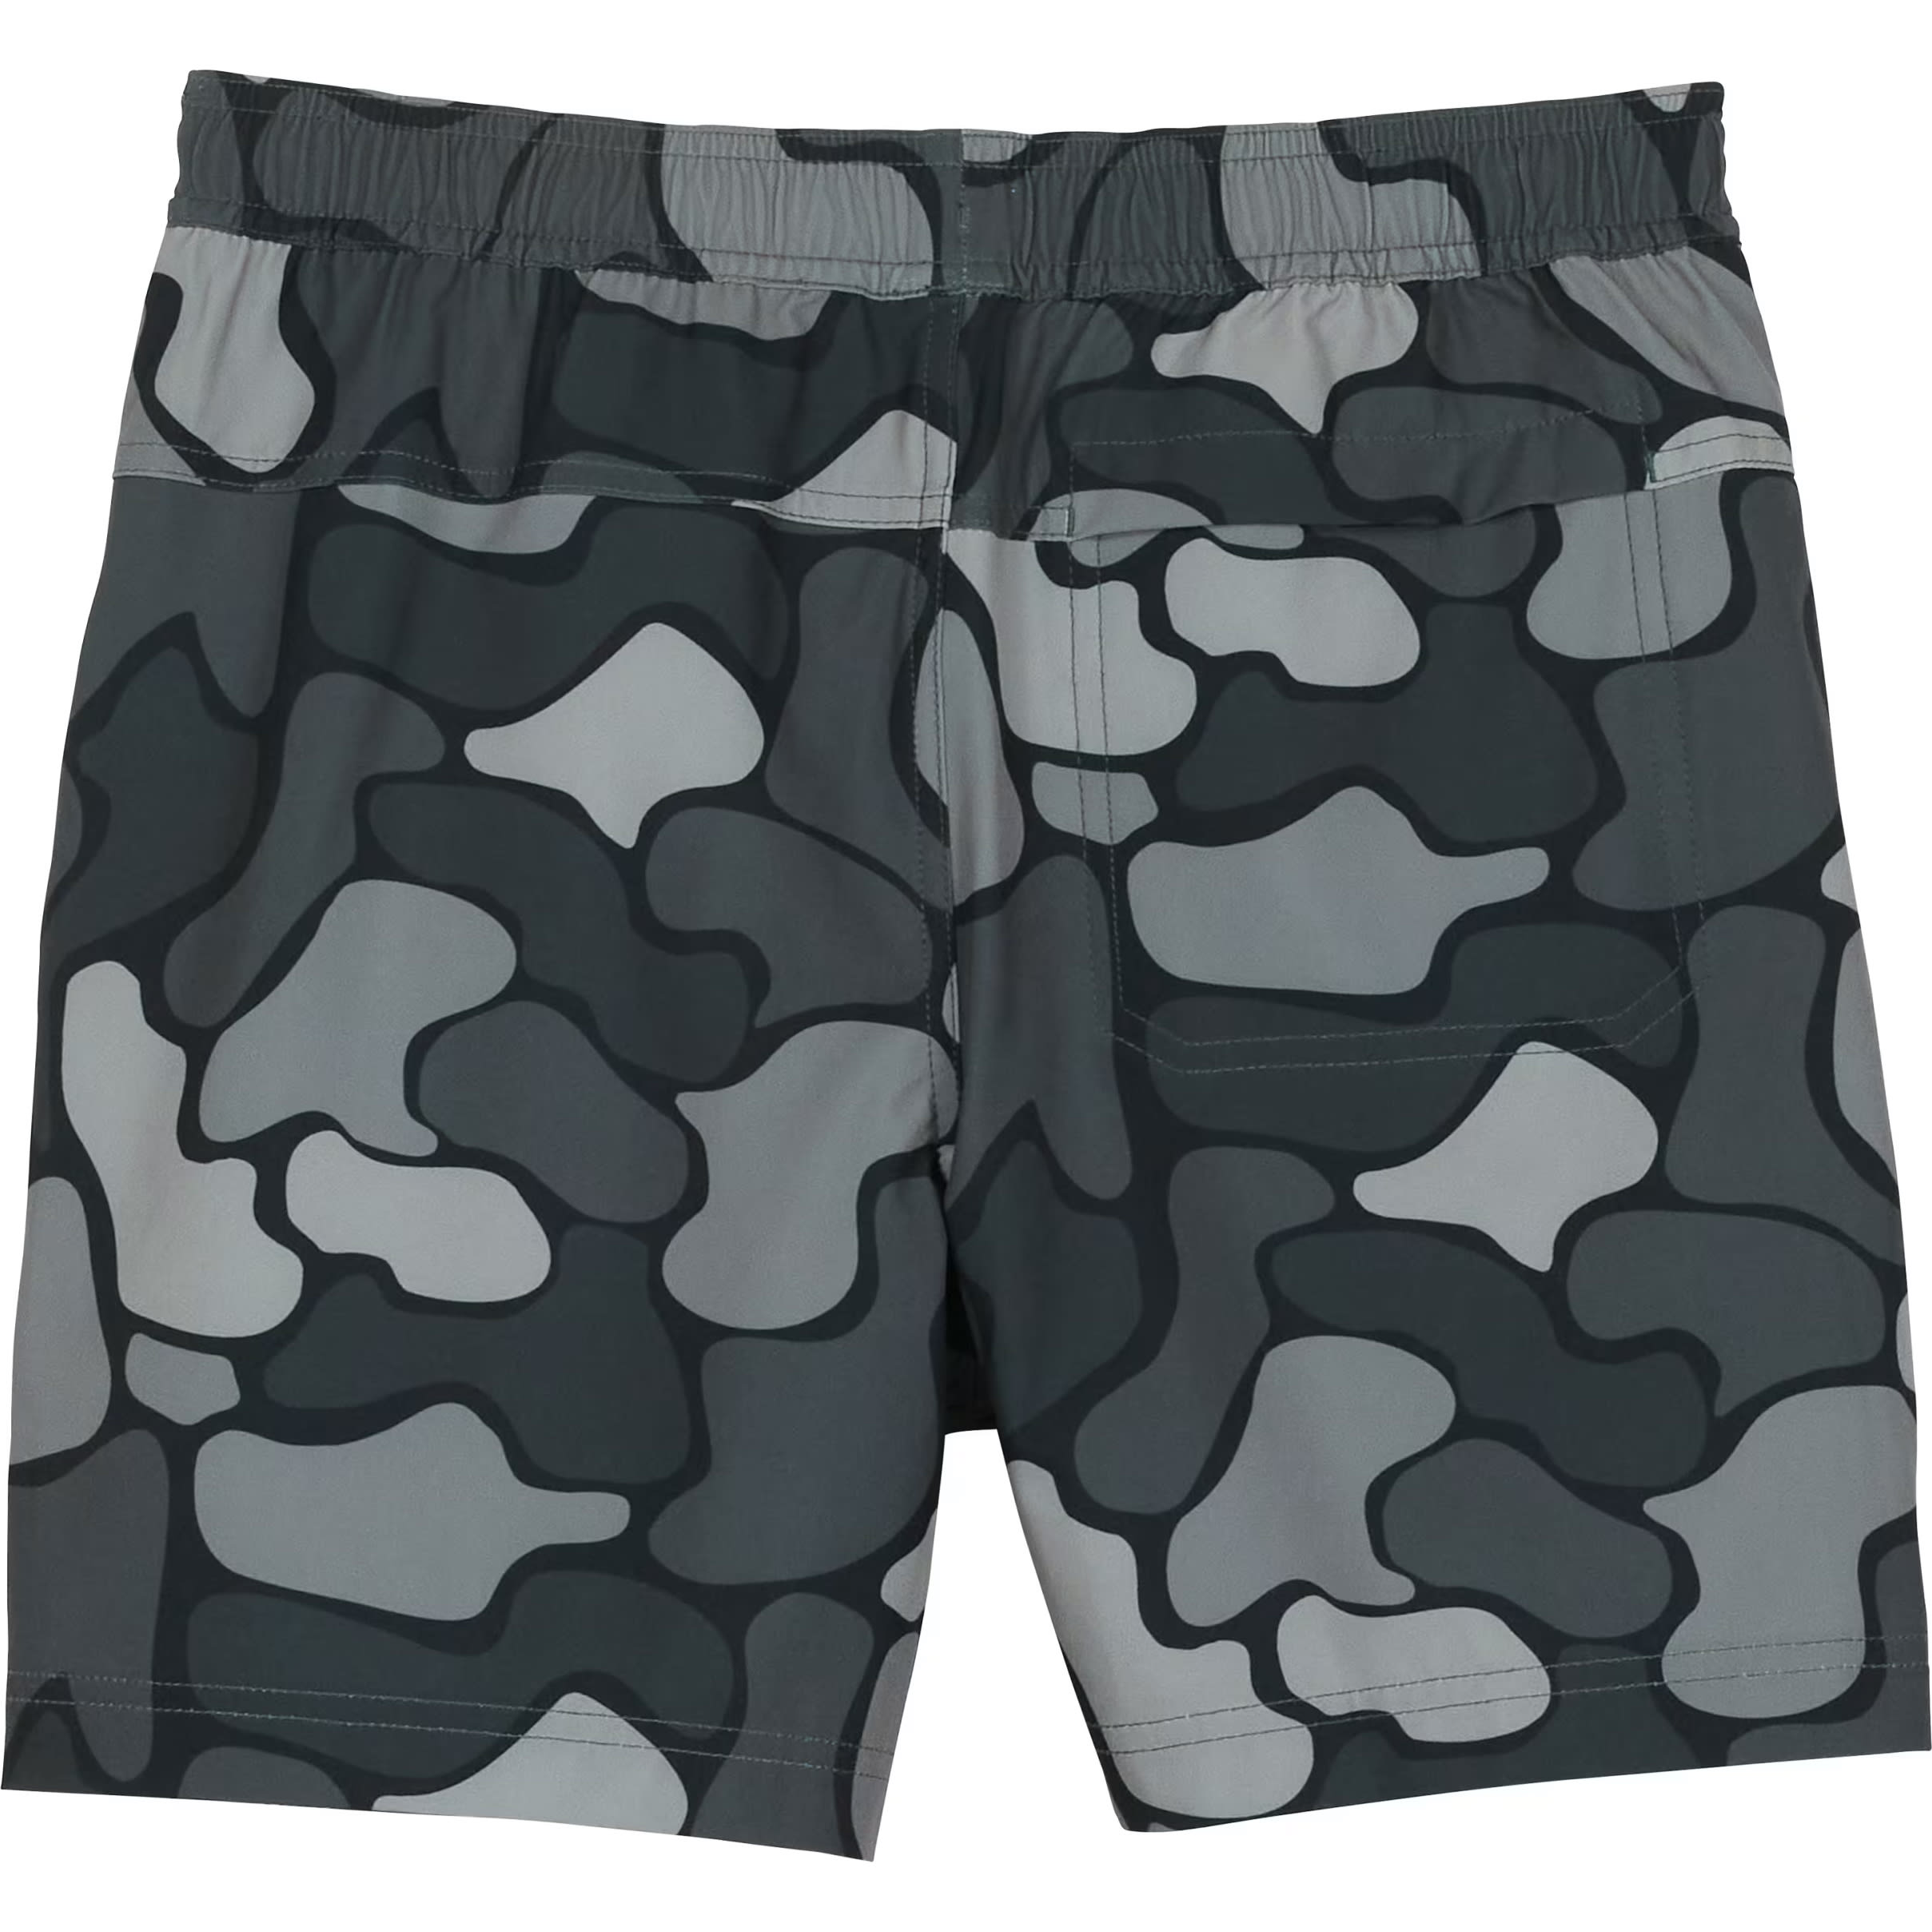 World Wide Sportsman® Youth Charter Shorts